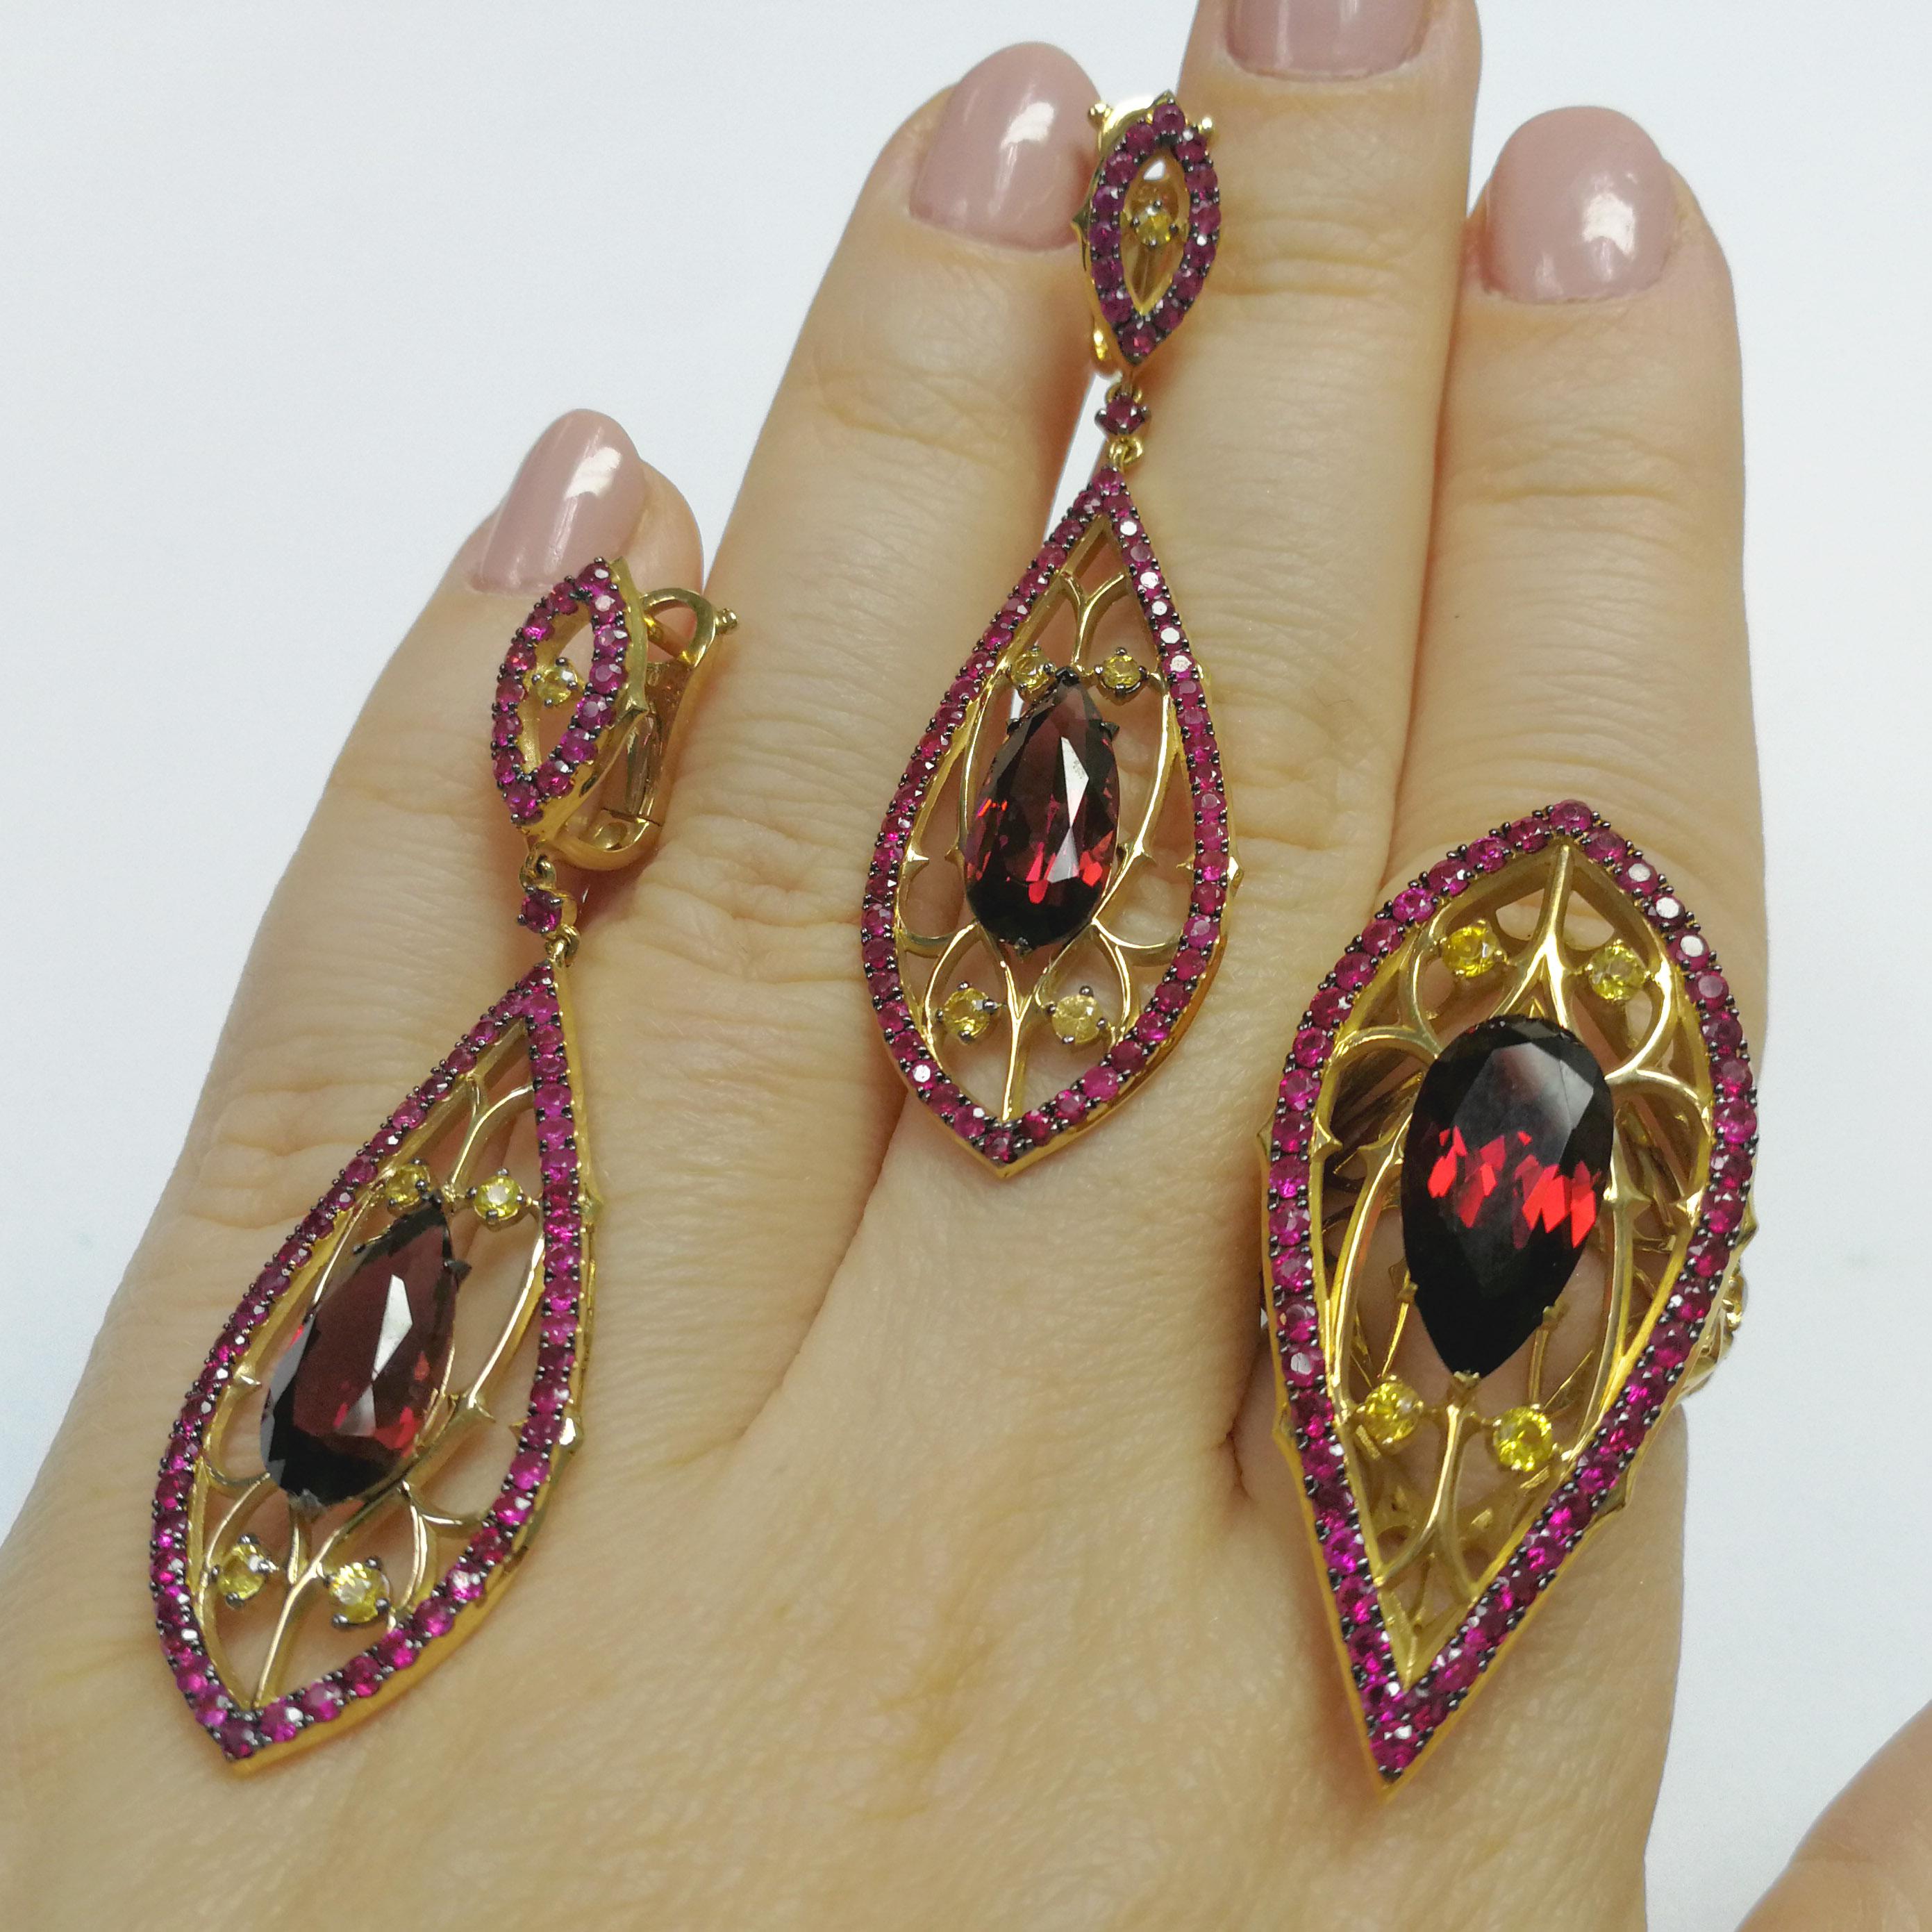 Garnet Ruby Sapphire 18 Karat Yellow Gold Gothic Suite
Imagine a Gothic cathedral with all its grace, upward aspiration and colorful stained glass windows. At the idea of this collection, our designers were inspired by all this beauty. Suite seems